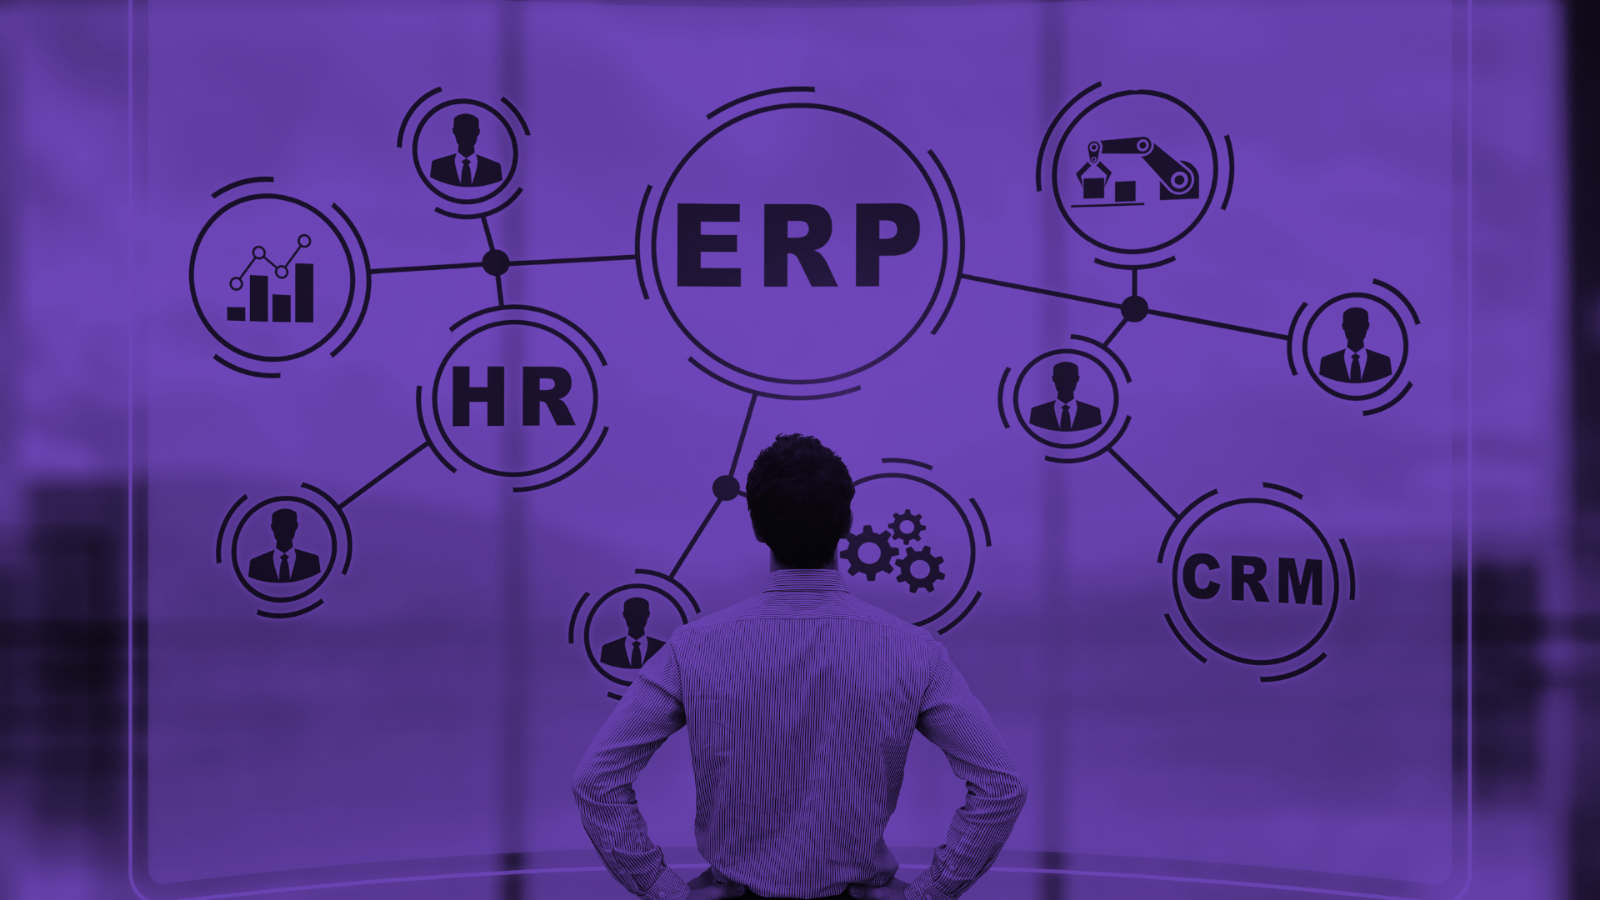 5 Easy Ways To Improve Your ERP For More Efficiency